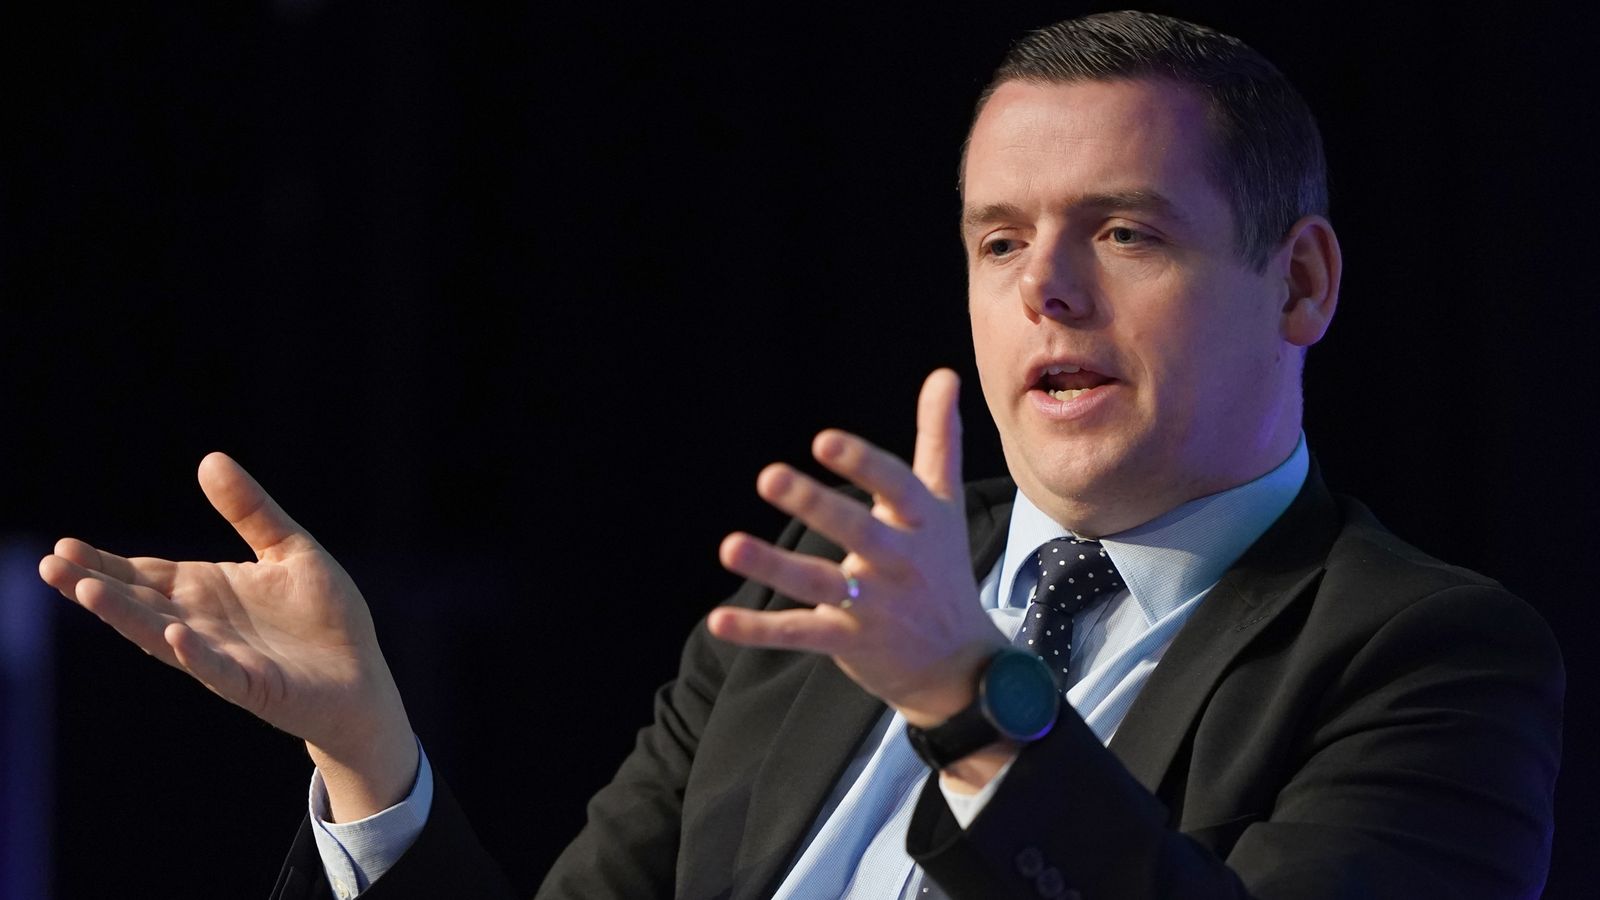 Scottish Tory leader Douglas Ross criticises SNP 'secrecy, spin and cover-ups'